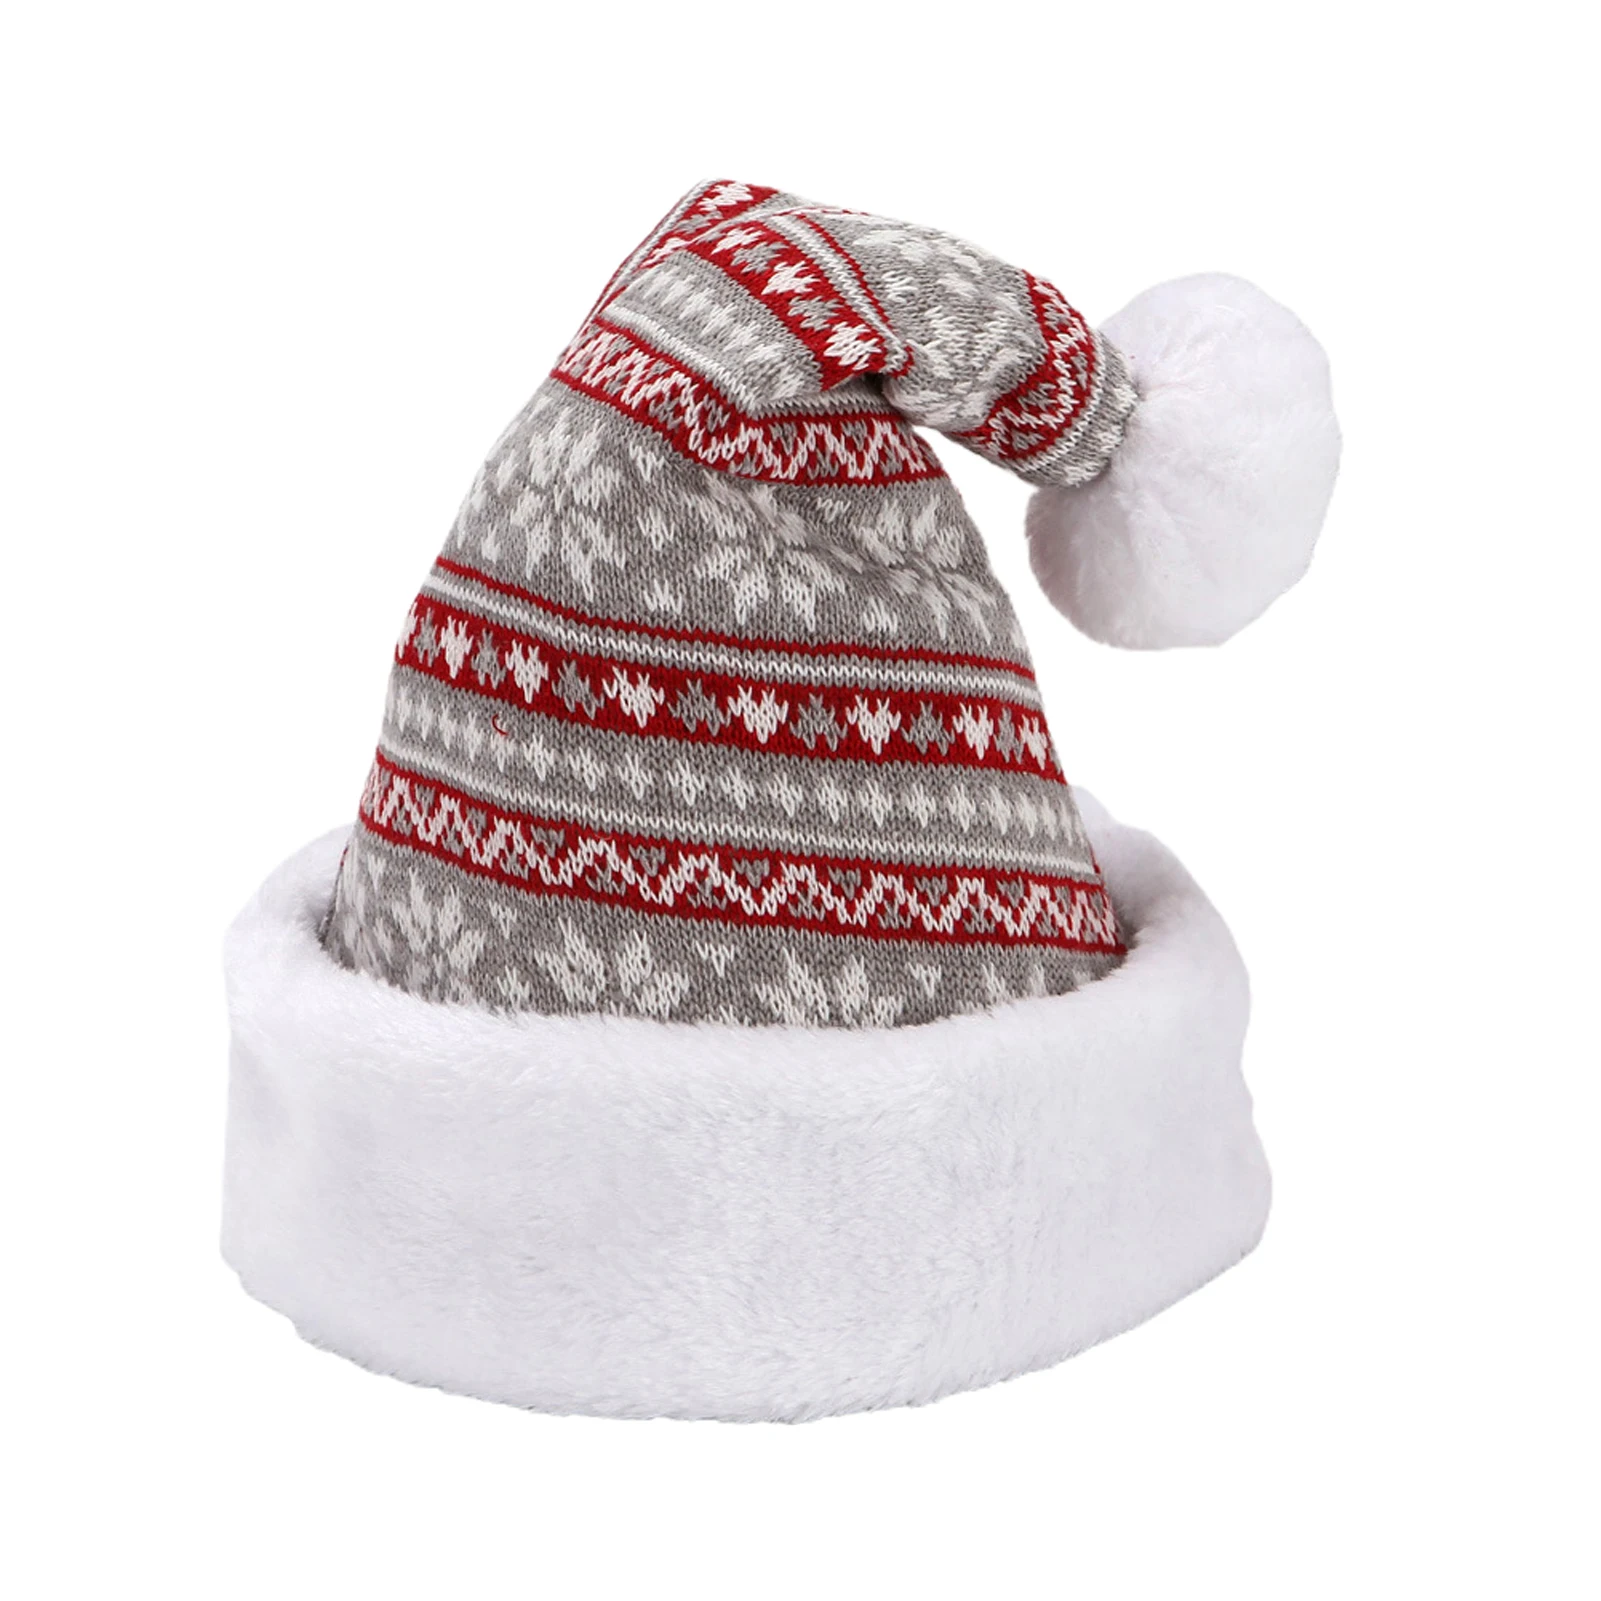 

Pompom Adults New Year Christmas Hat Elastic Winter Warm Soft Knitted Outdoor Sports Snow Elk Pattern Cute Gifts Beanie Party